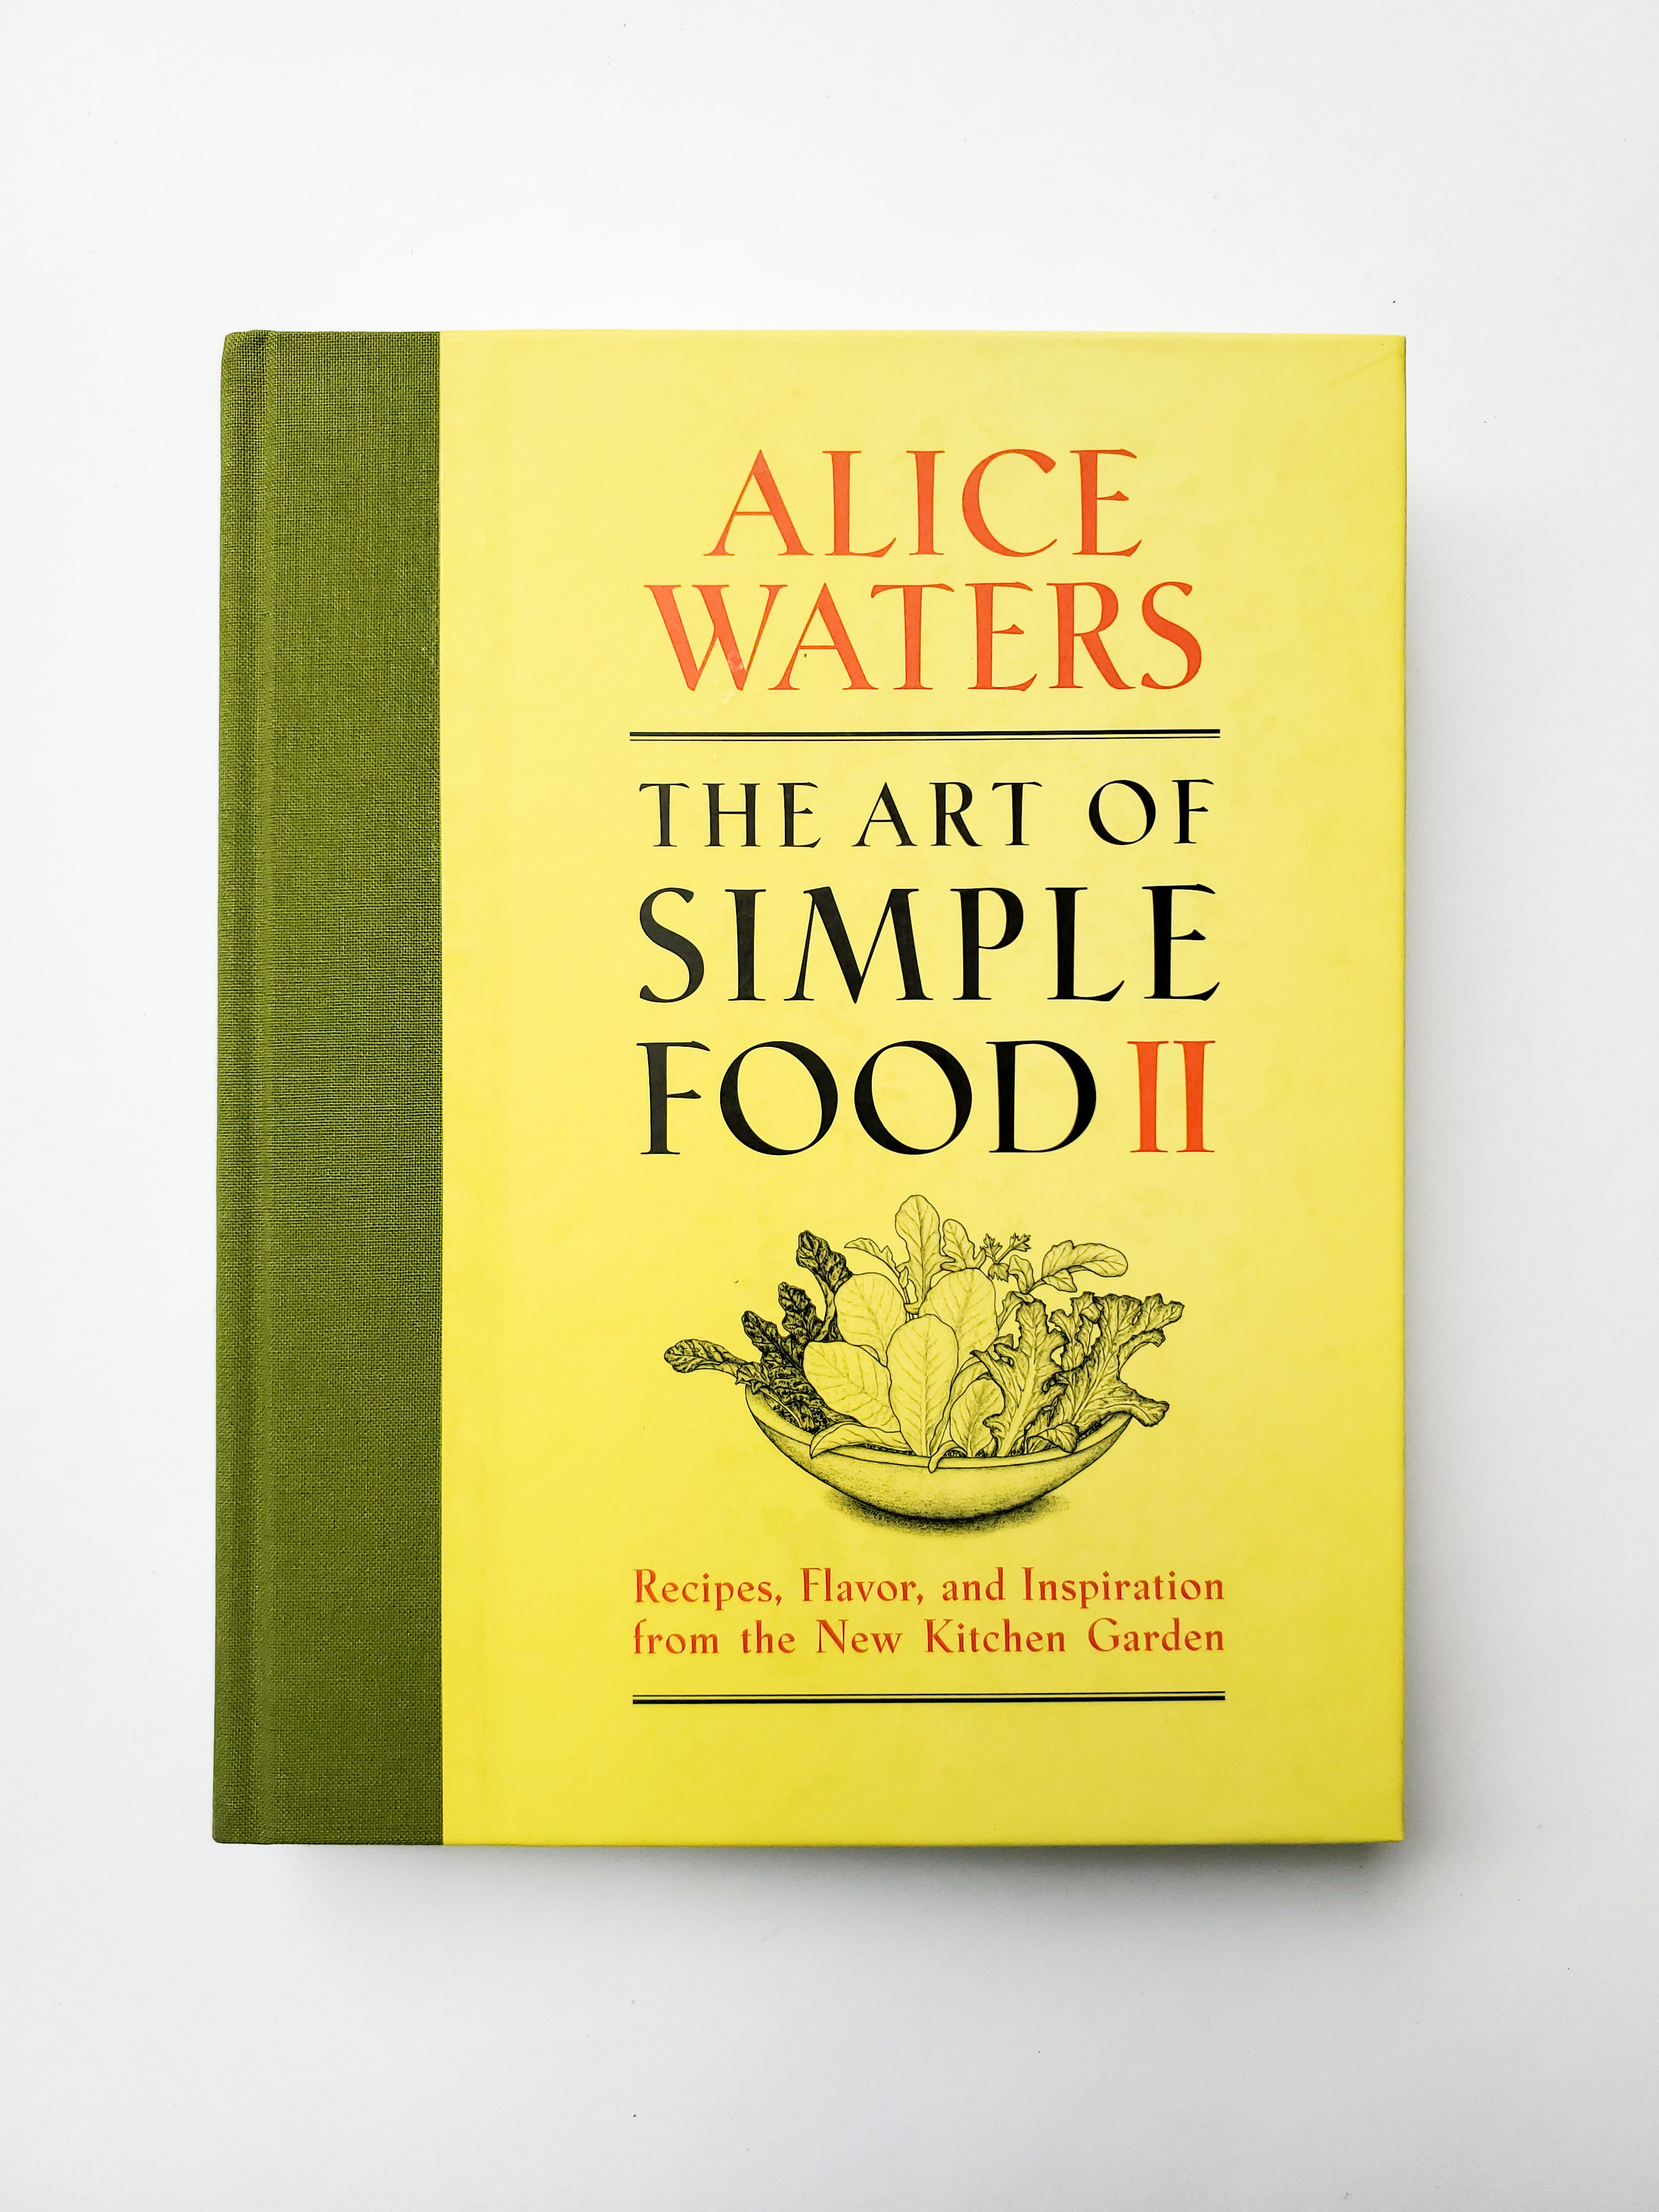 A book cover with the text 'Alice Waters. The Art of Simple Food II. Recipes, Flavor, and Inspiration from the New Kitchen Garden."